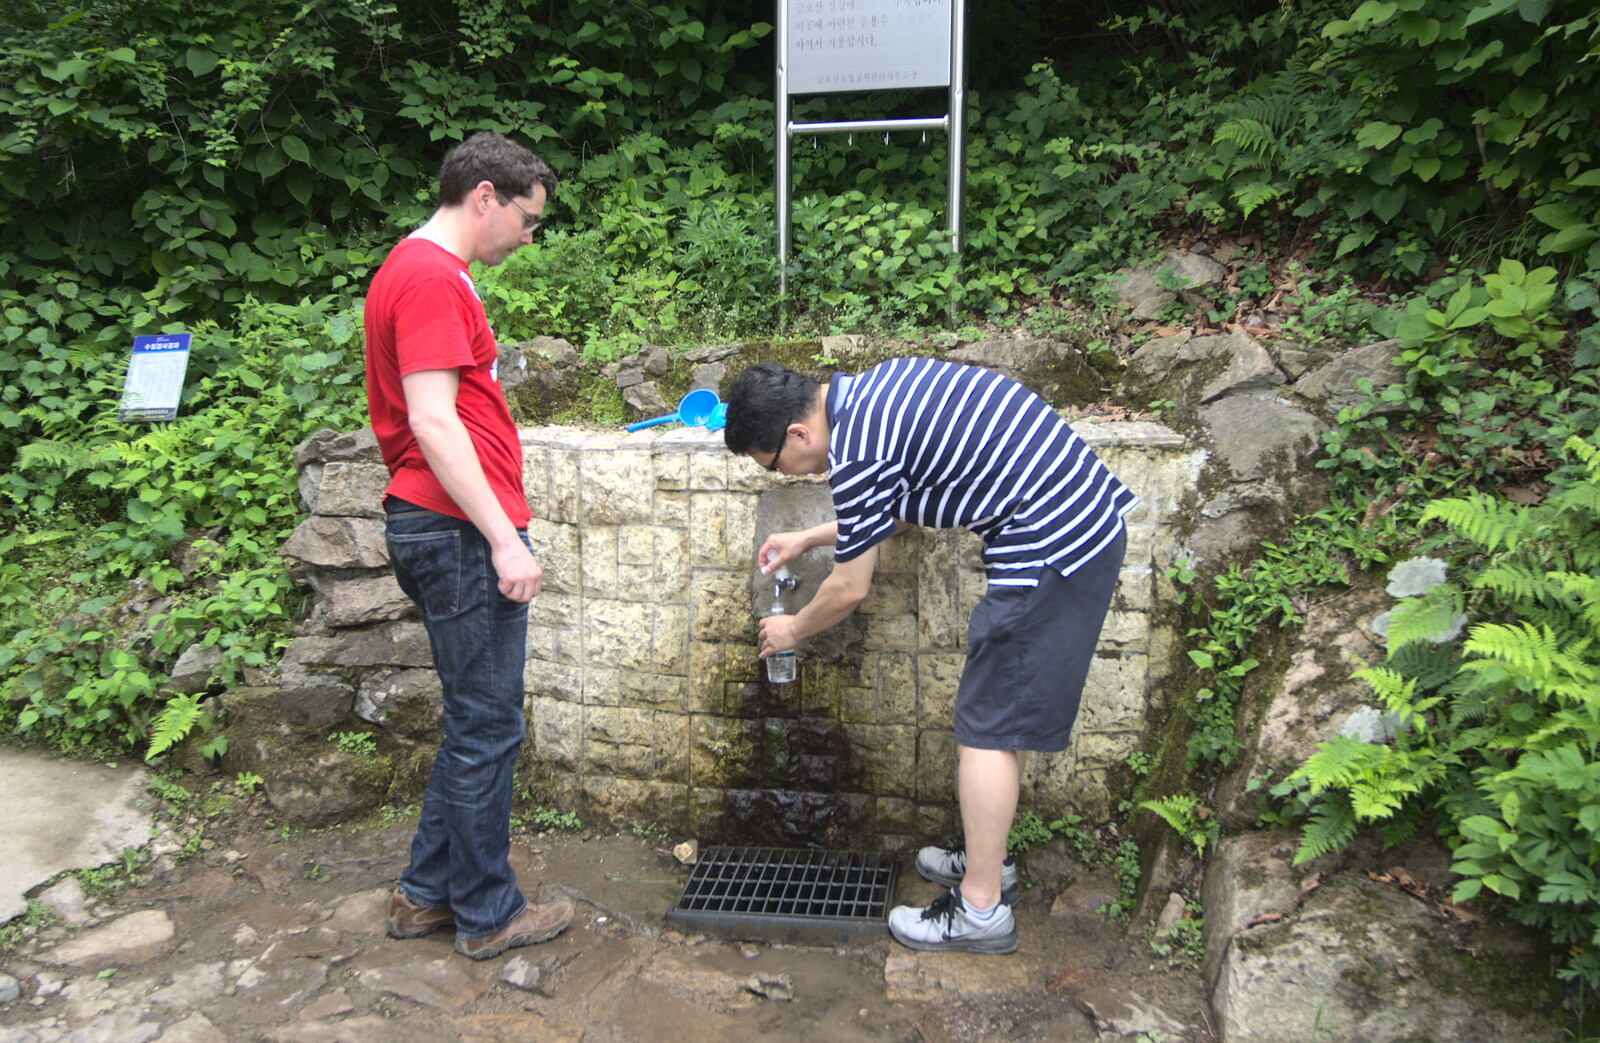 Hyosoo tops up our water stash at a spring-fed tap from Working at Samsung, and Geumosan Mountain, Gumi, Gyeongsangbuk-do, Korea - 24th June 2012